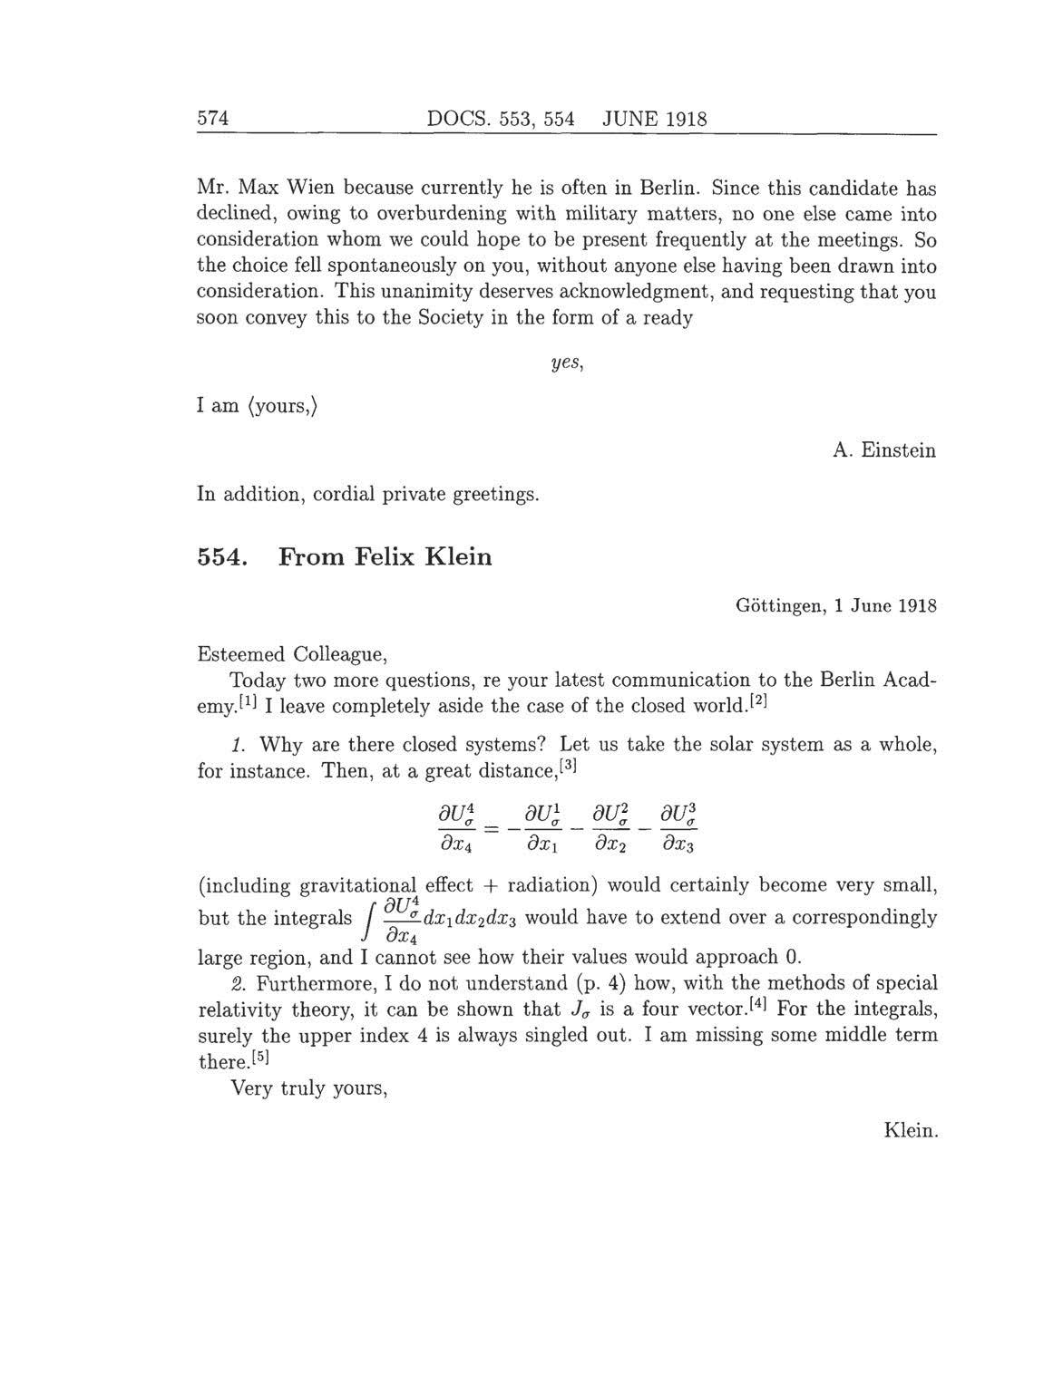 Volume 8: The Berlin Years: Correspondence, 1914-1918 (English translation supplement) page 574